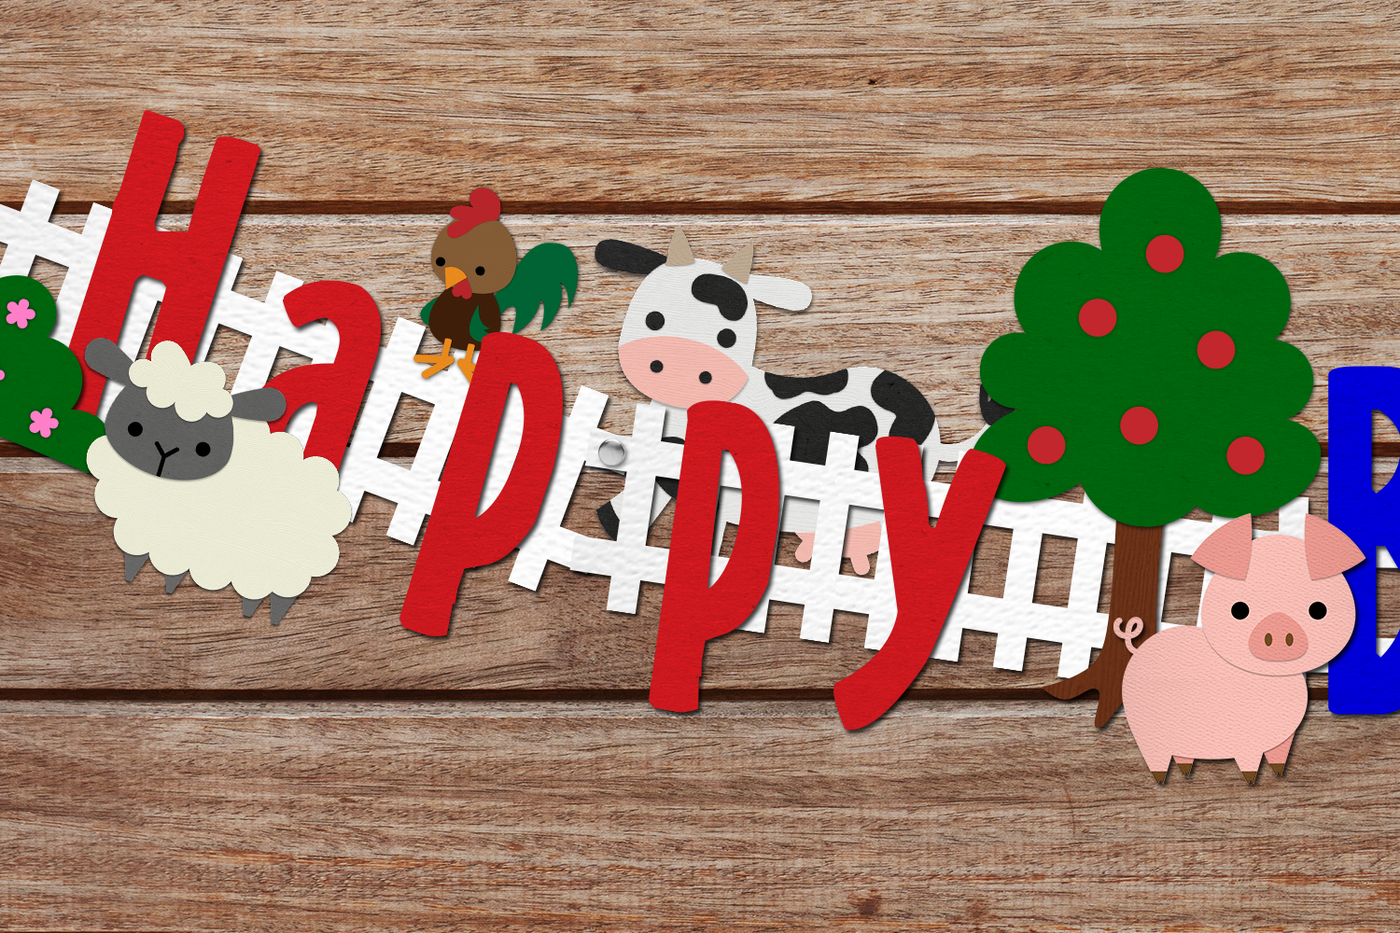 A banner made from paper that resembles a white picket fence with various farm animals. Has the word "Happy" on it.